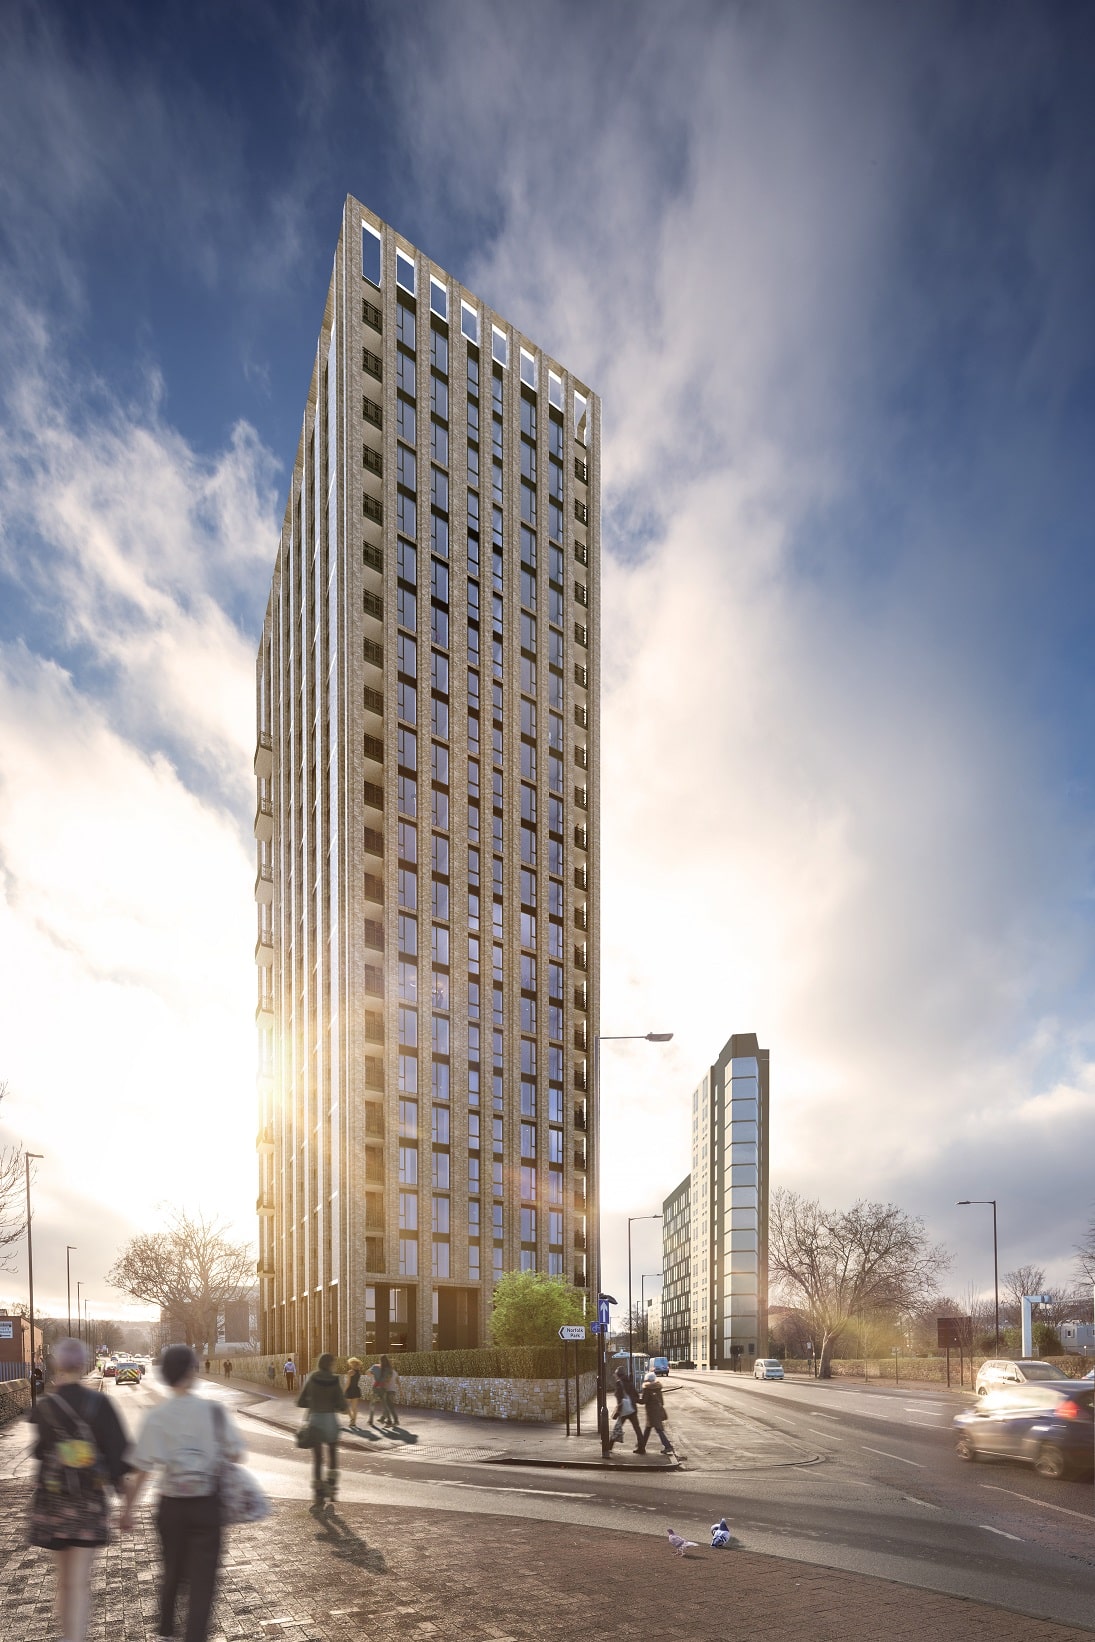 Plans Submitted for Apartments in Sheffield UK